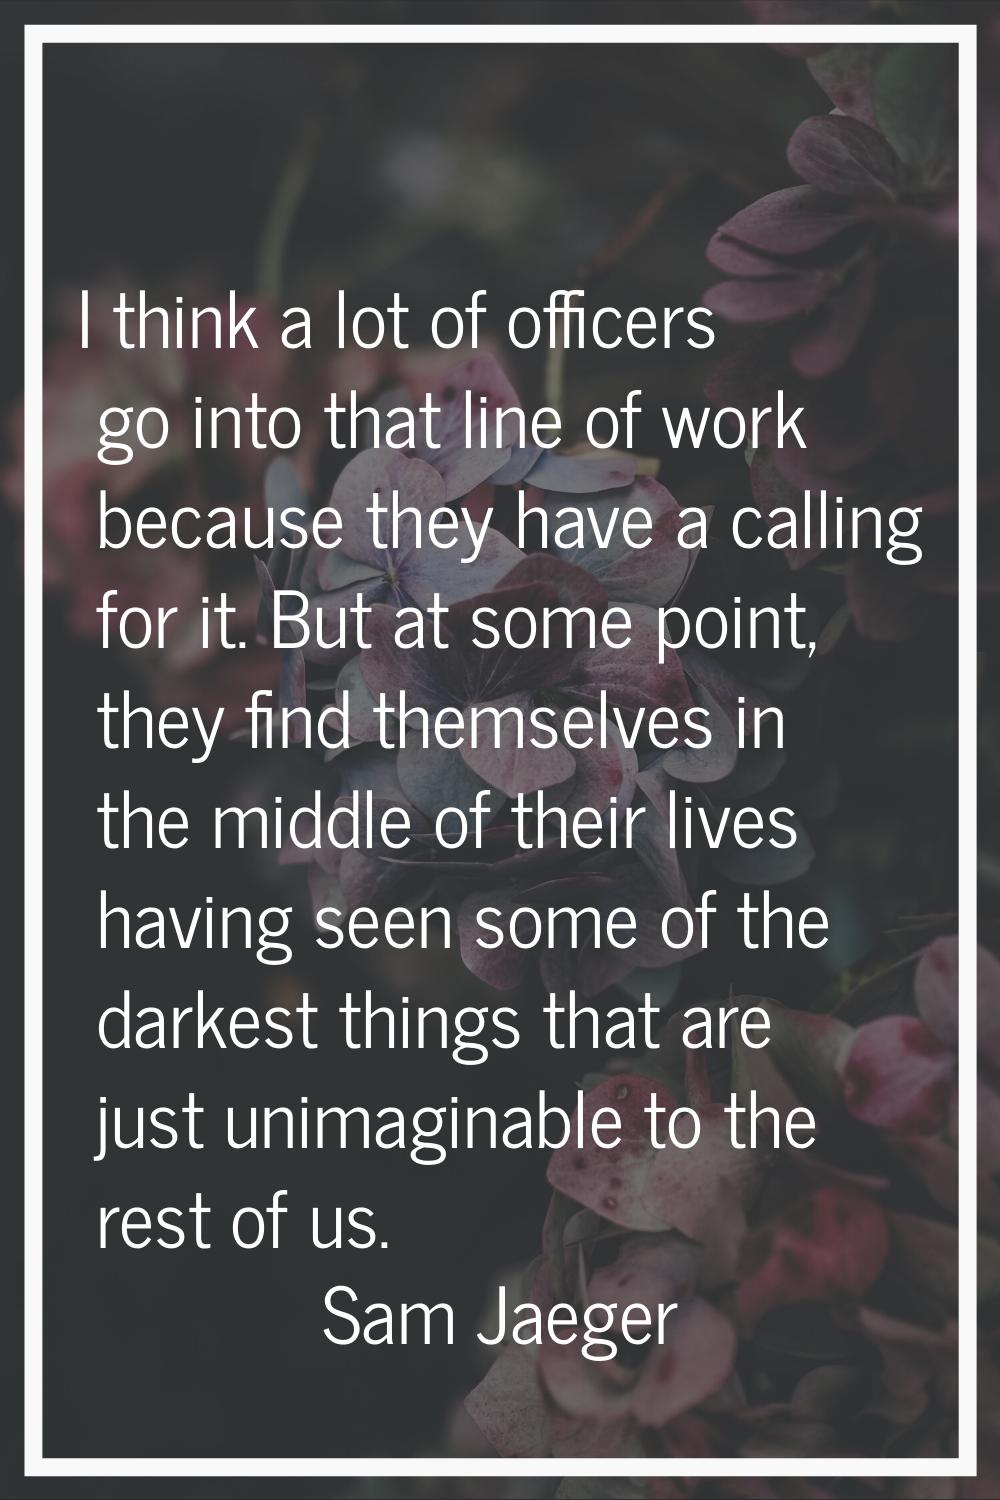 I think a lot of officers go into that line of work because they have a calling for it. But at some